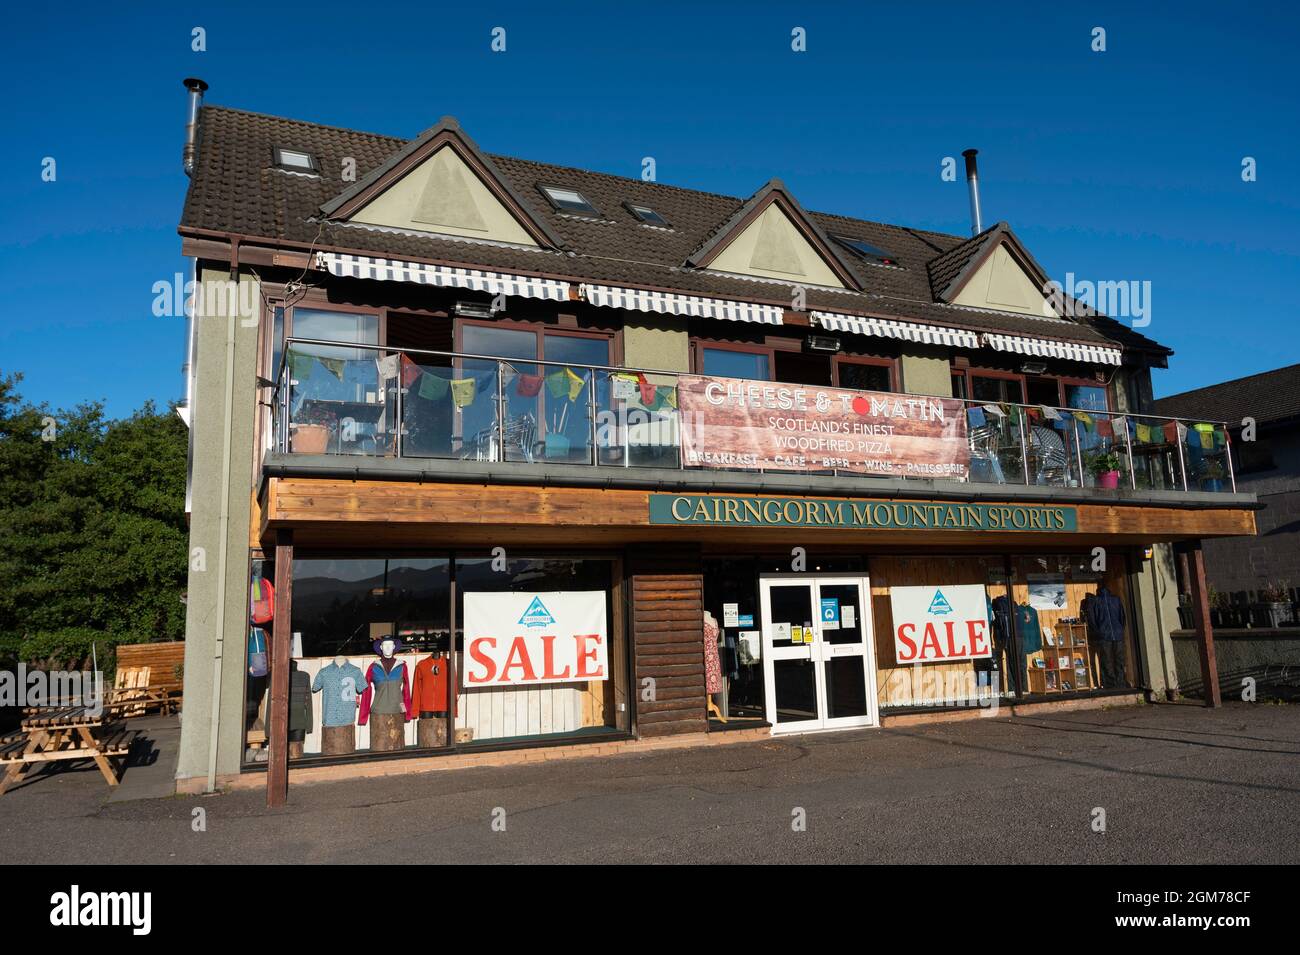 Exterior of Cairngorm Mountain Sports shop with Cheese and Tomatin pizza cafe above. Sunny day, no people, blue sky. Stock Photo